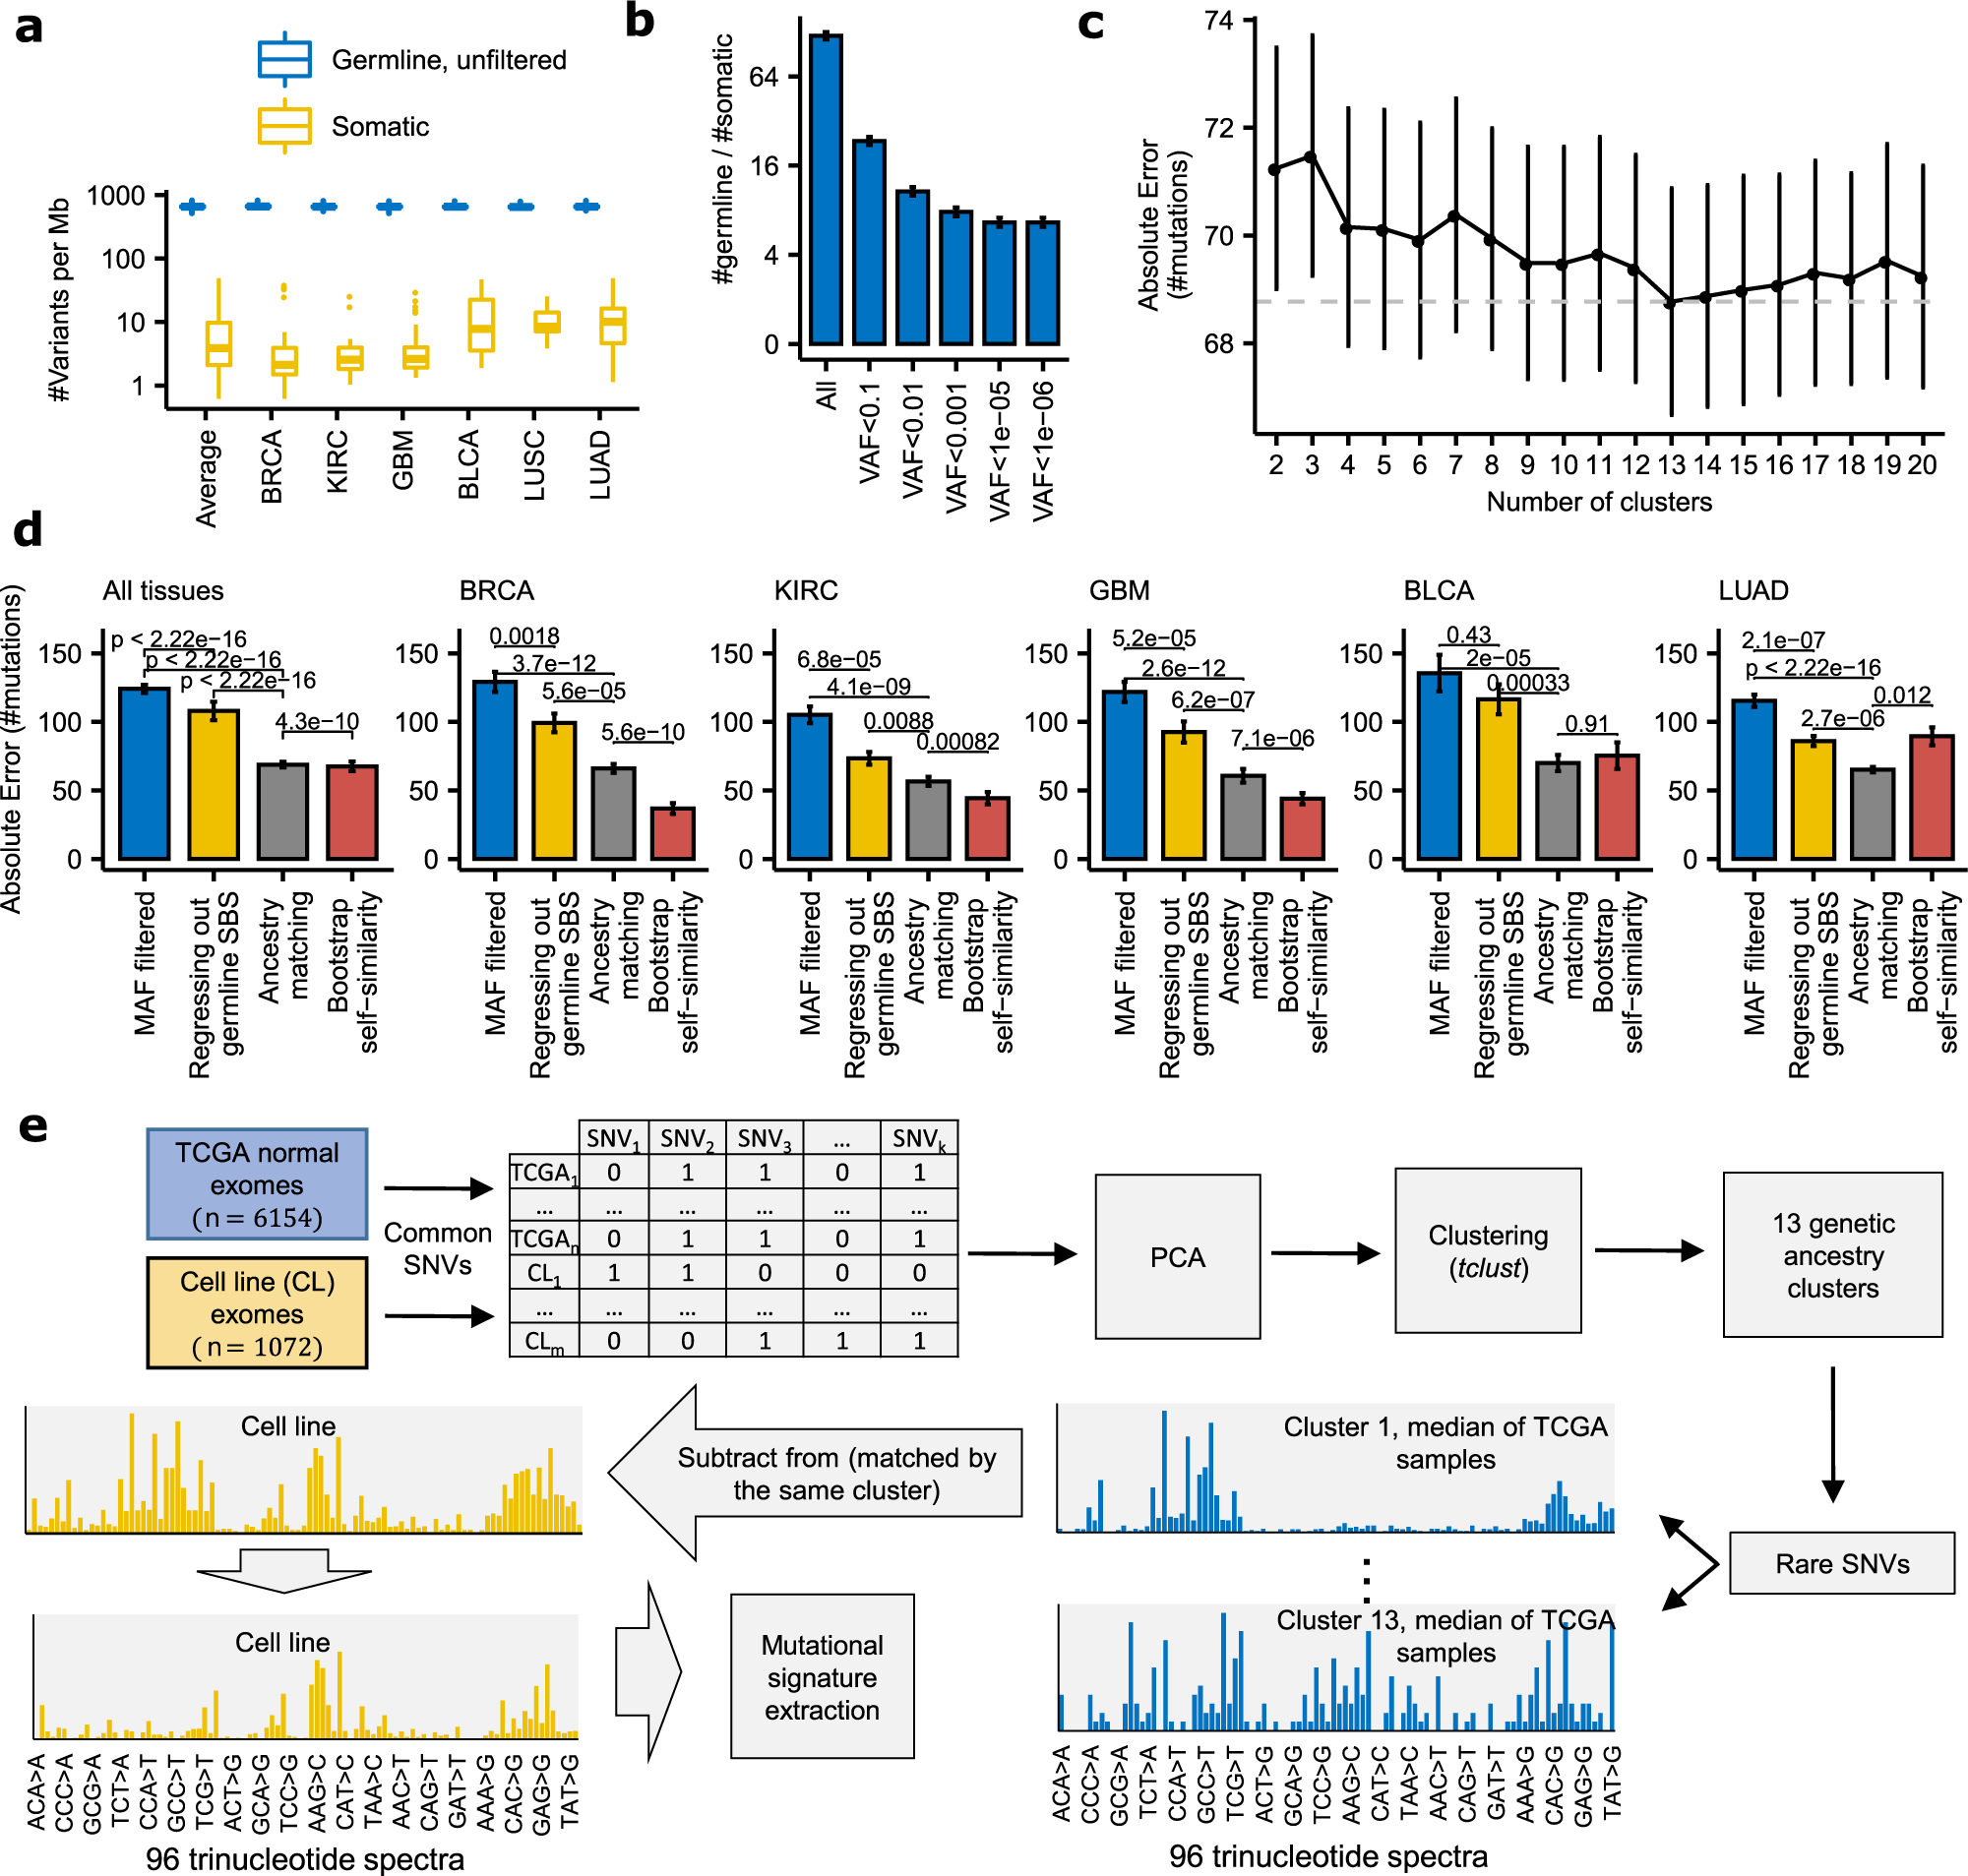 Mutational signatures are markers of drug sensitivity of cancer cells |  Nature Communications